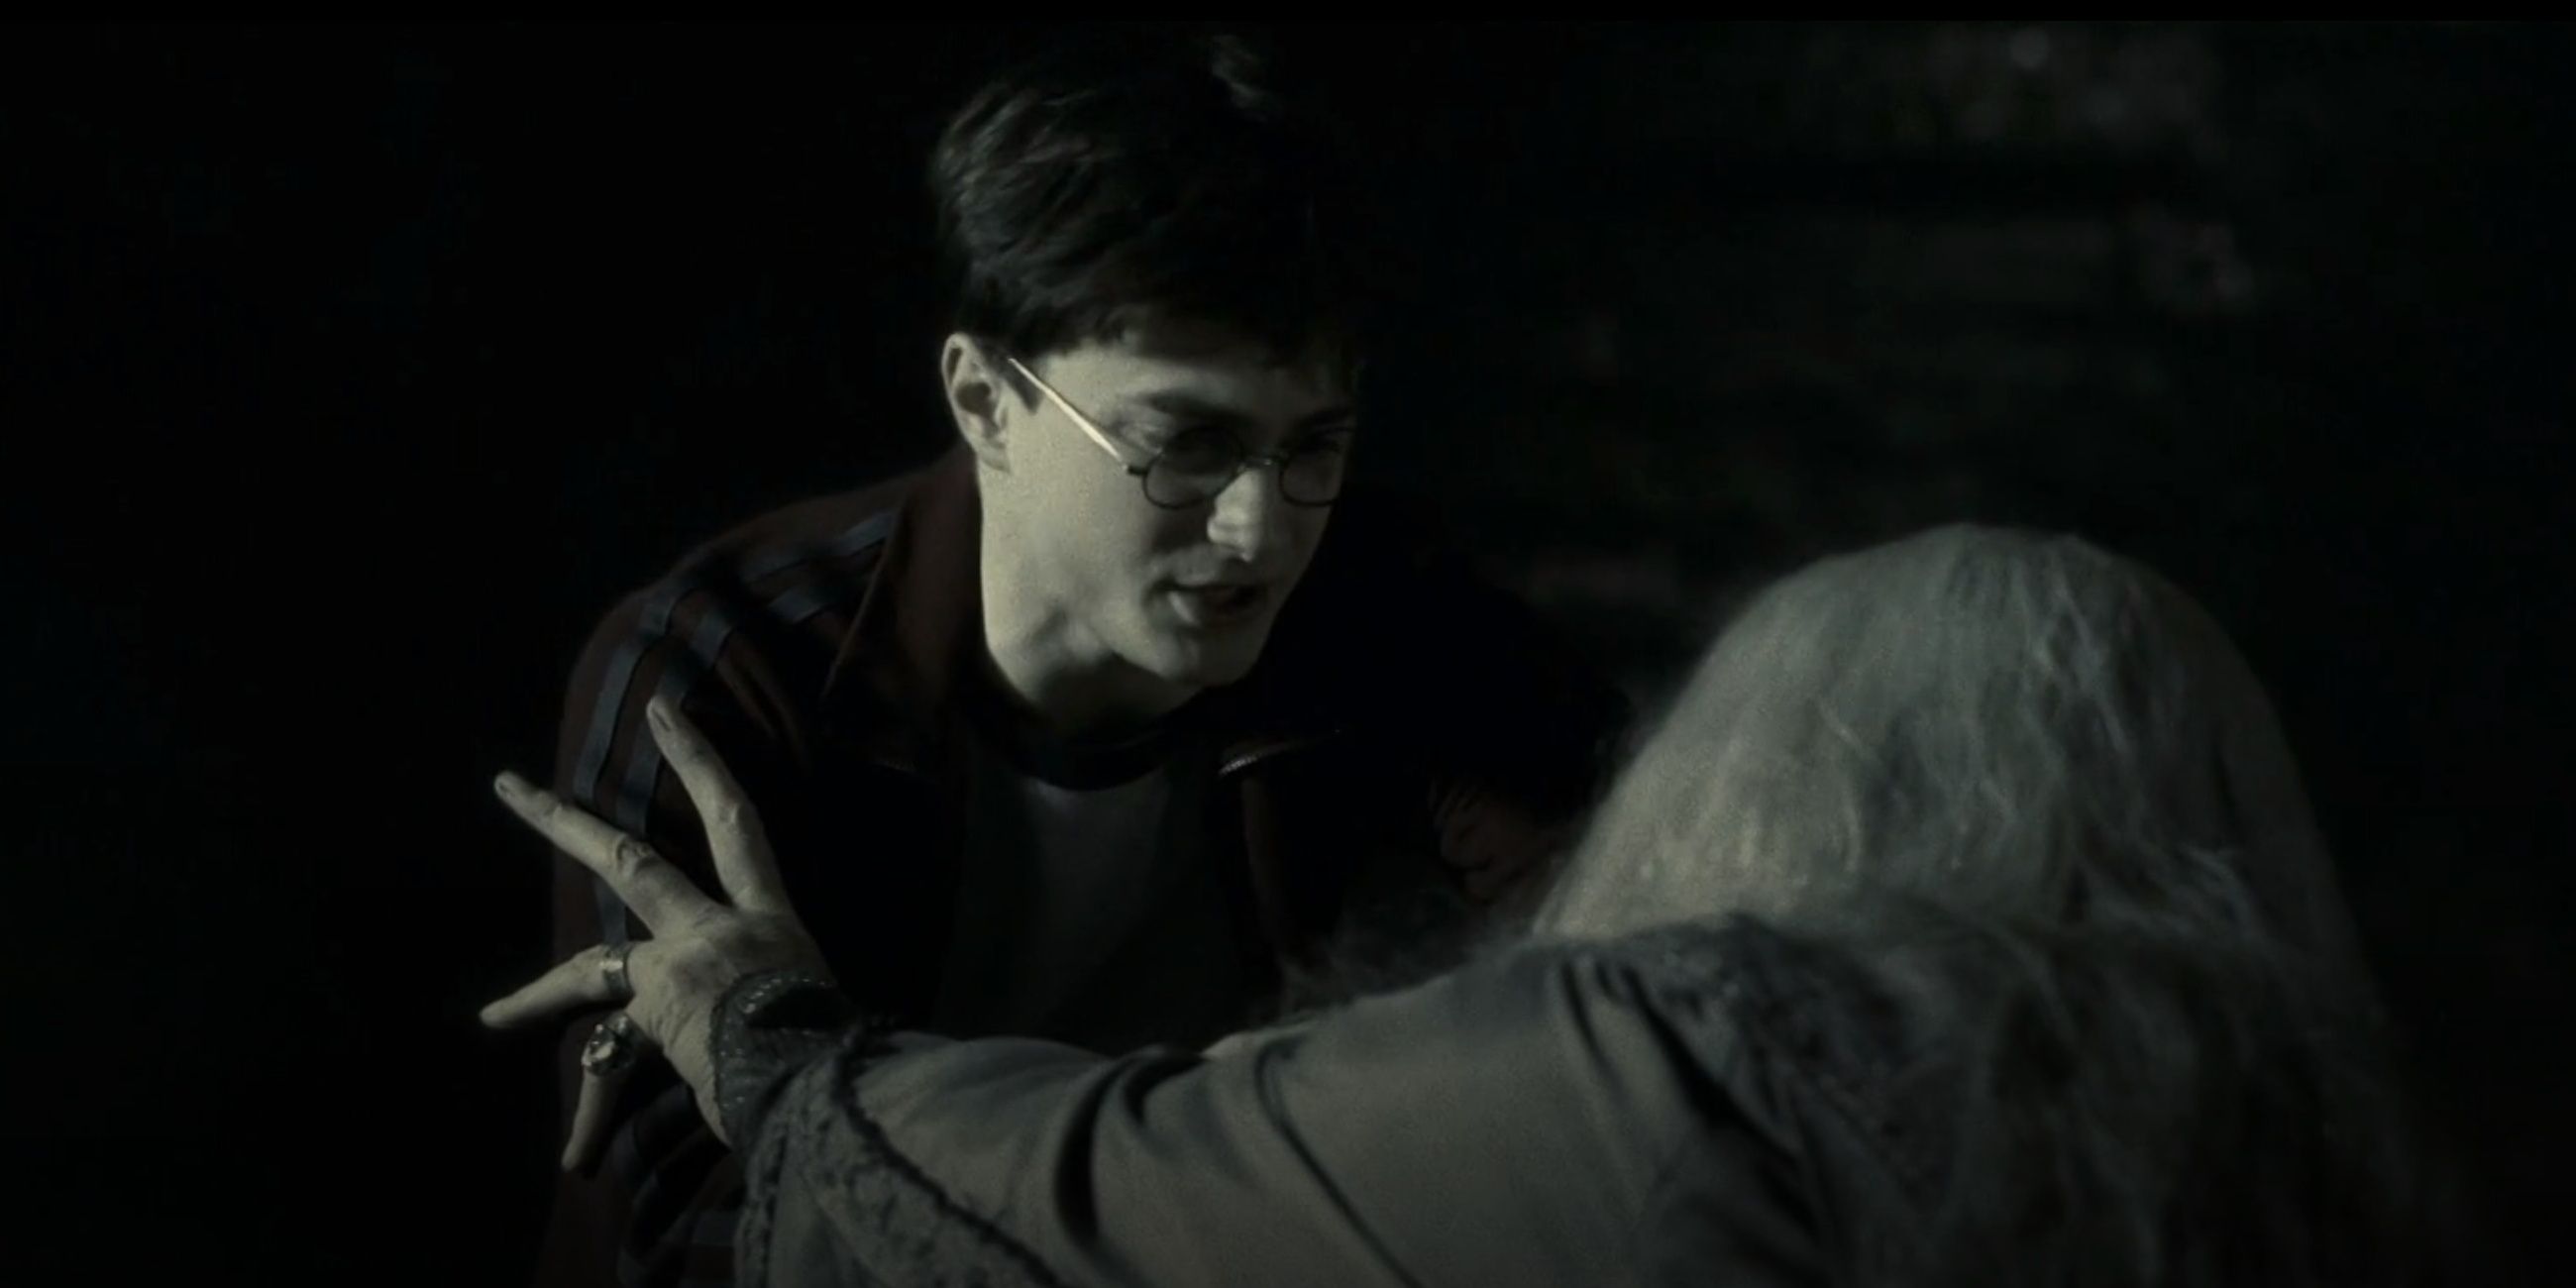 Harry Forcing Dumbledore To Drink Poison to find the Horcrux